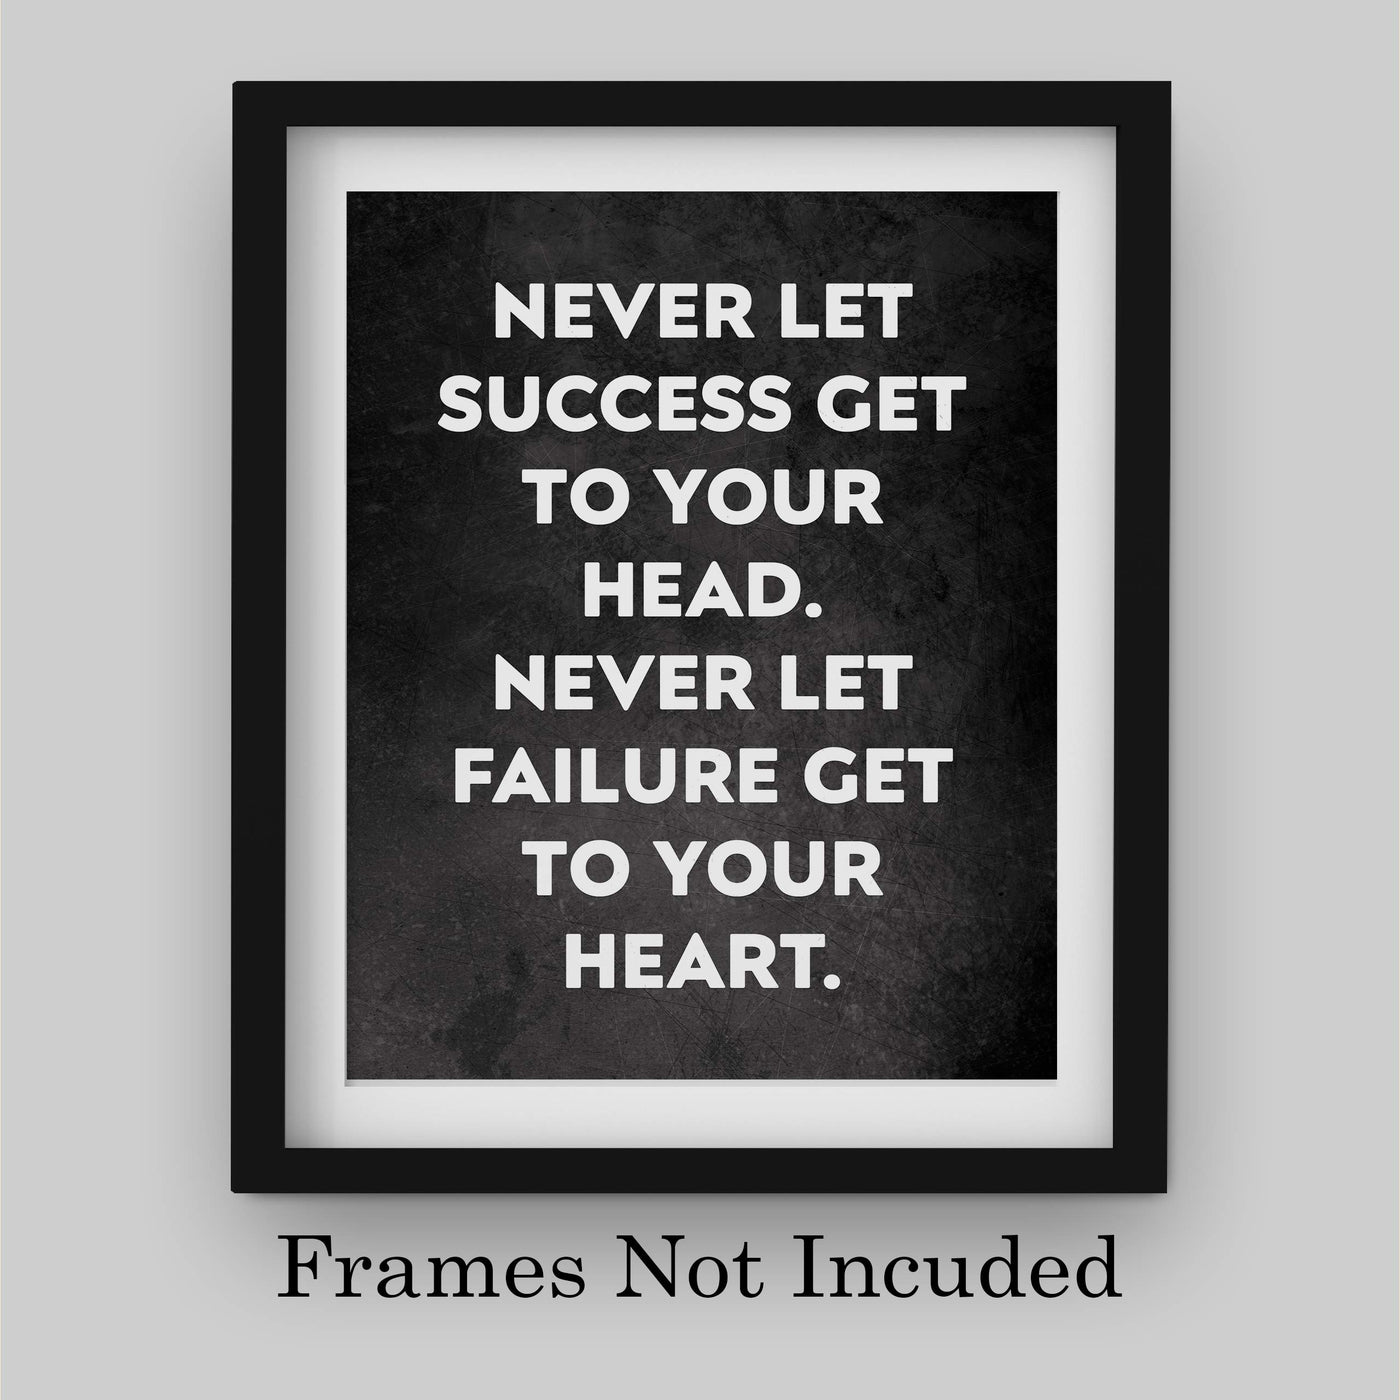 Never Let Success Get To Your Head Motivational Wall Sign -8 x 10" Modern Typographic Art Print-Ready to Frame. Ideal Home-Office-Work-Gym Decor. Perfect Desk & Cubicle Sign To Inspire Success!